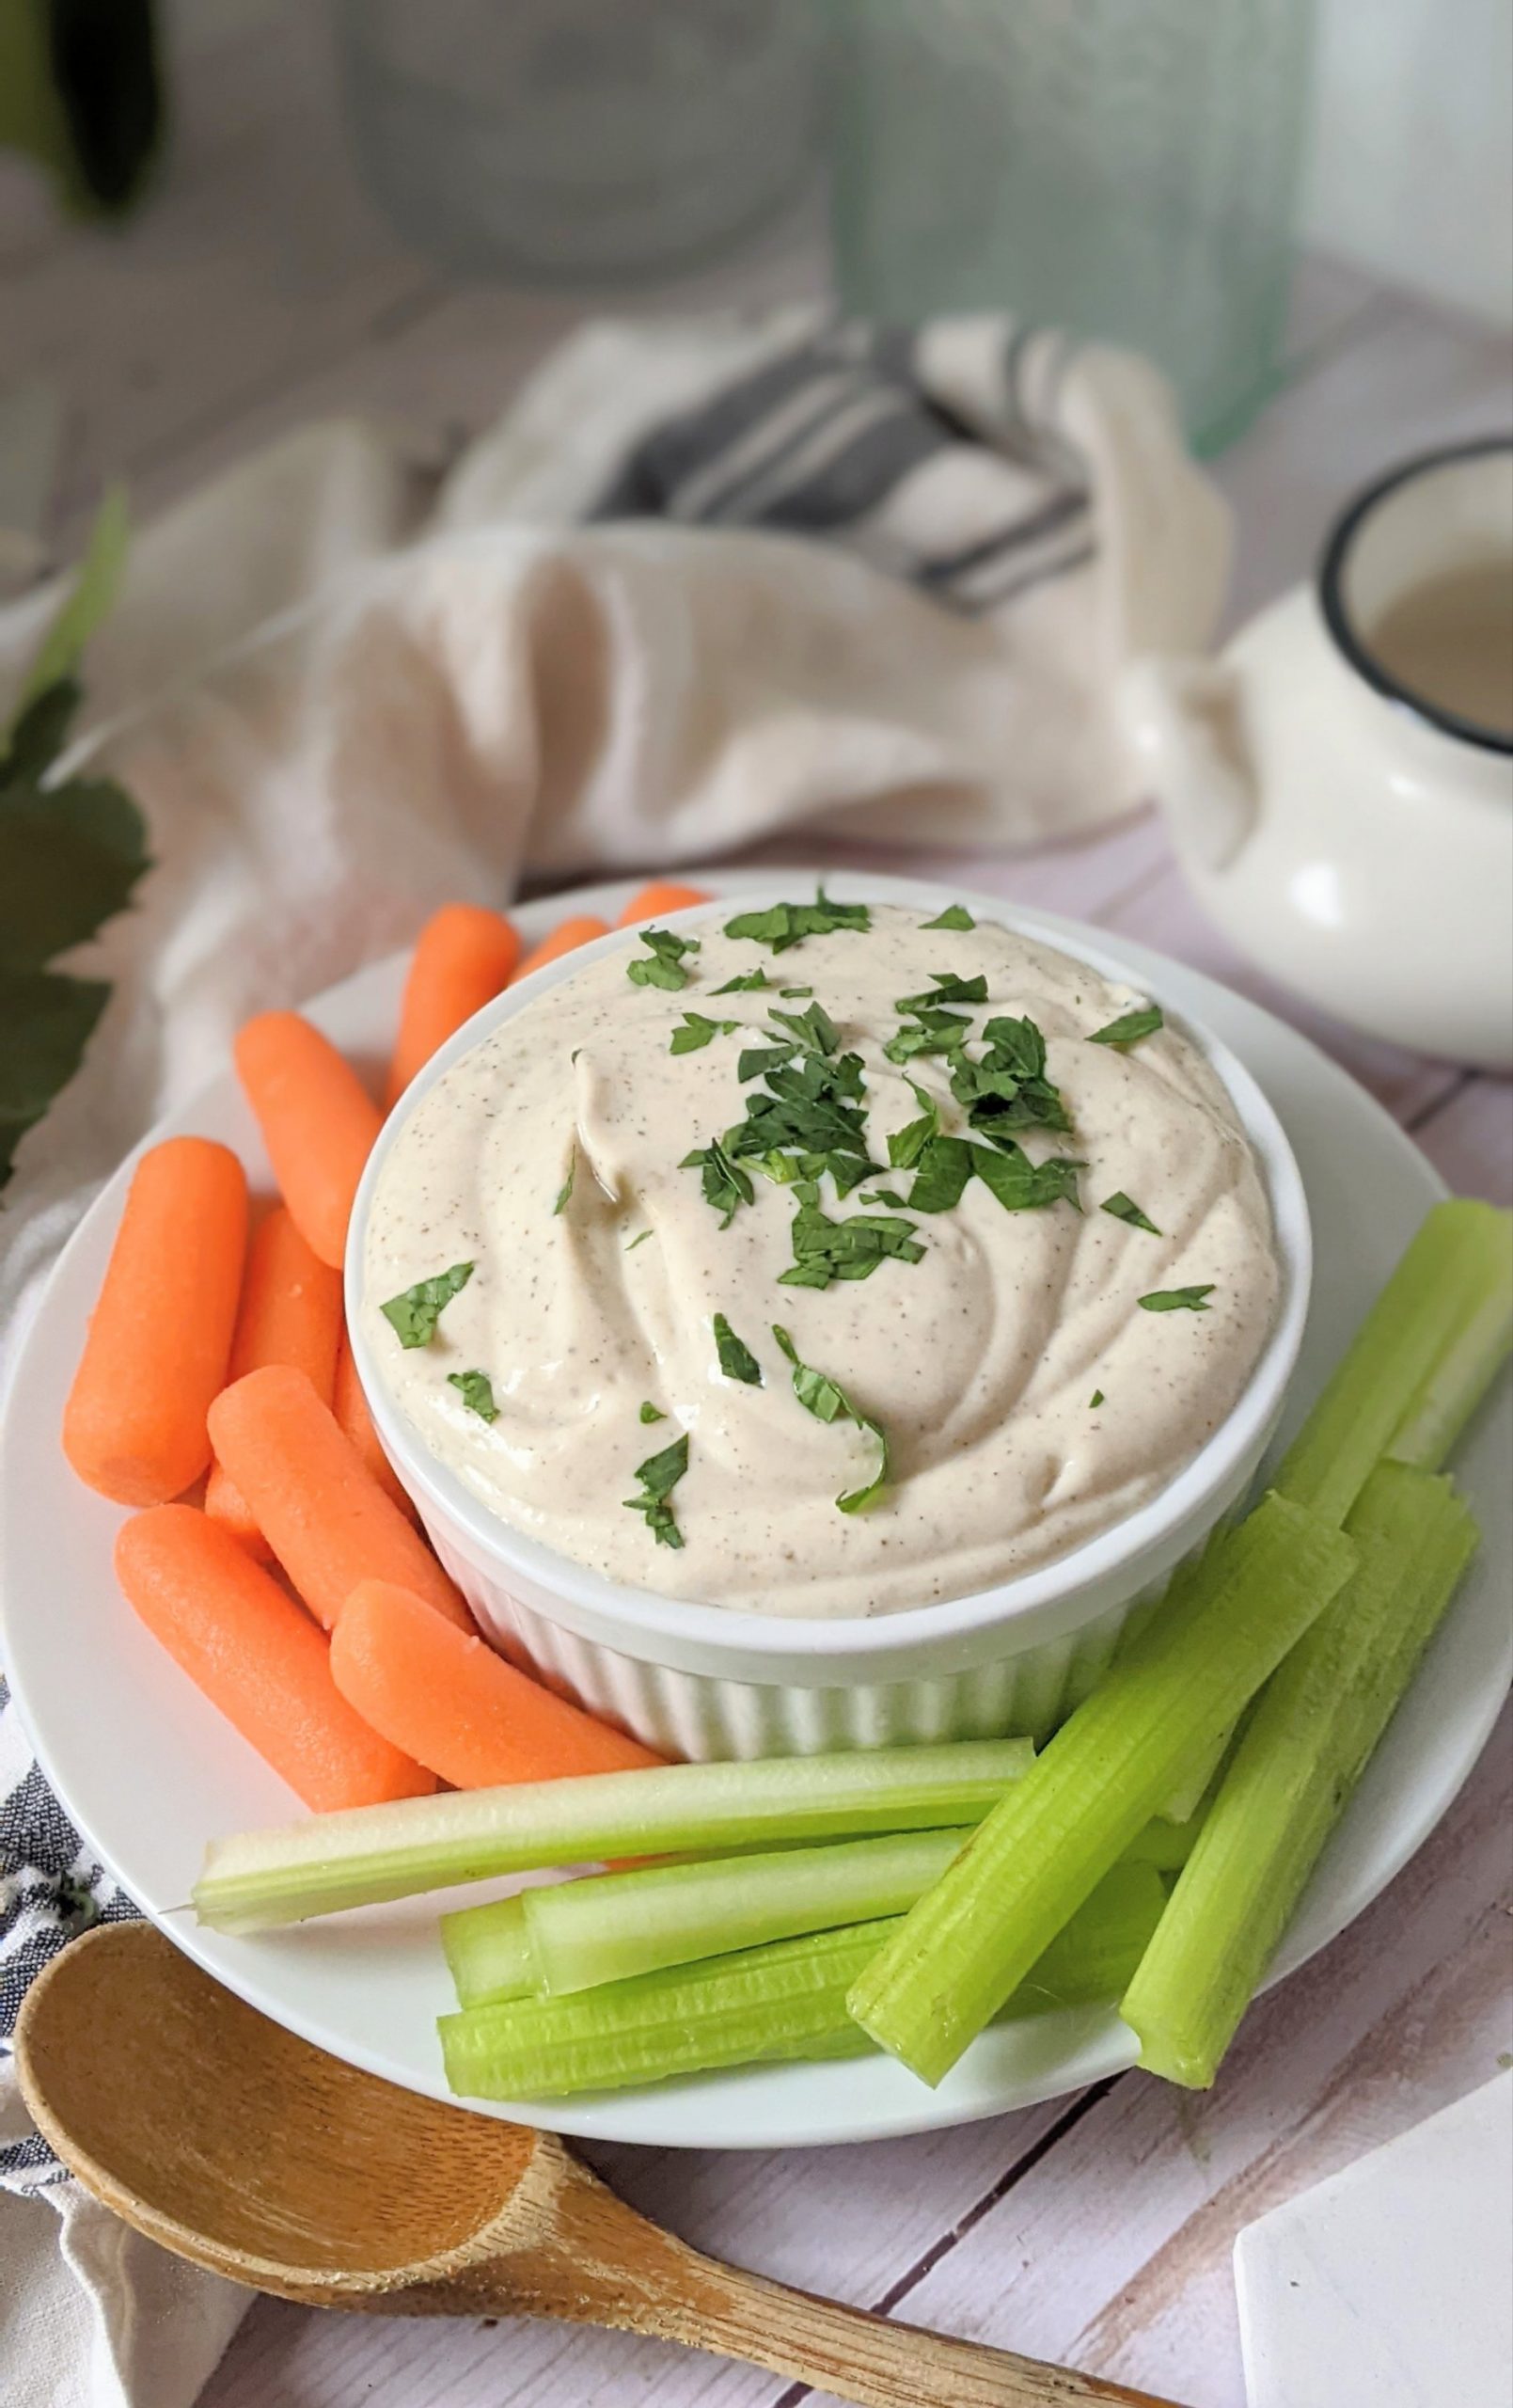 dairy free ranch dressing with tofu blender sauce for salads creamy vegan dip high protein sauces for veggies KETO